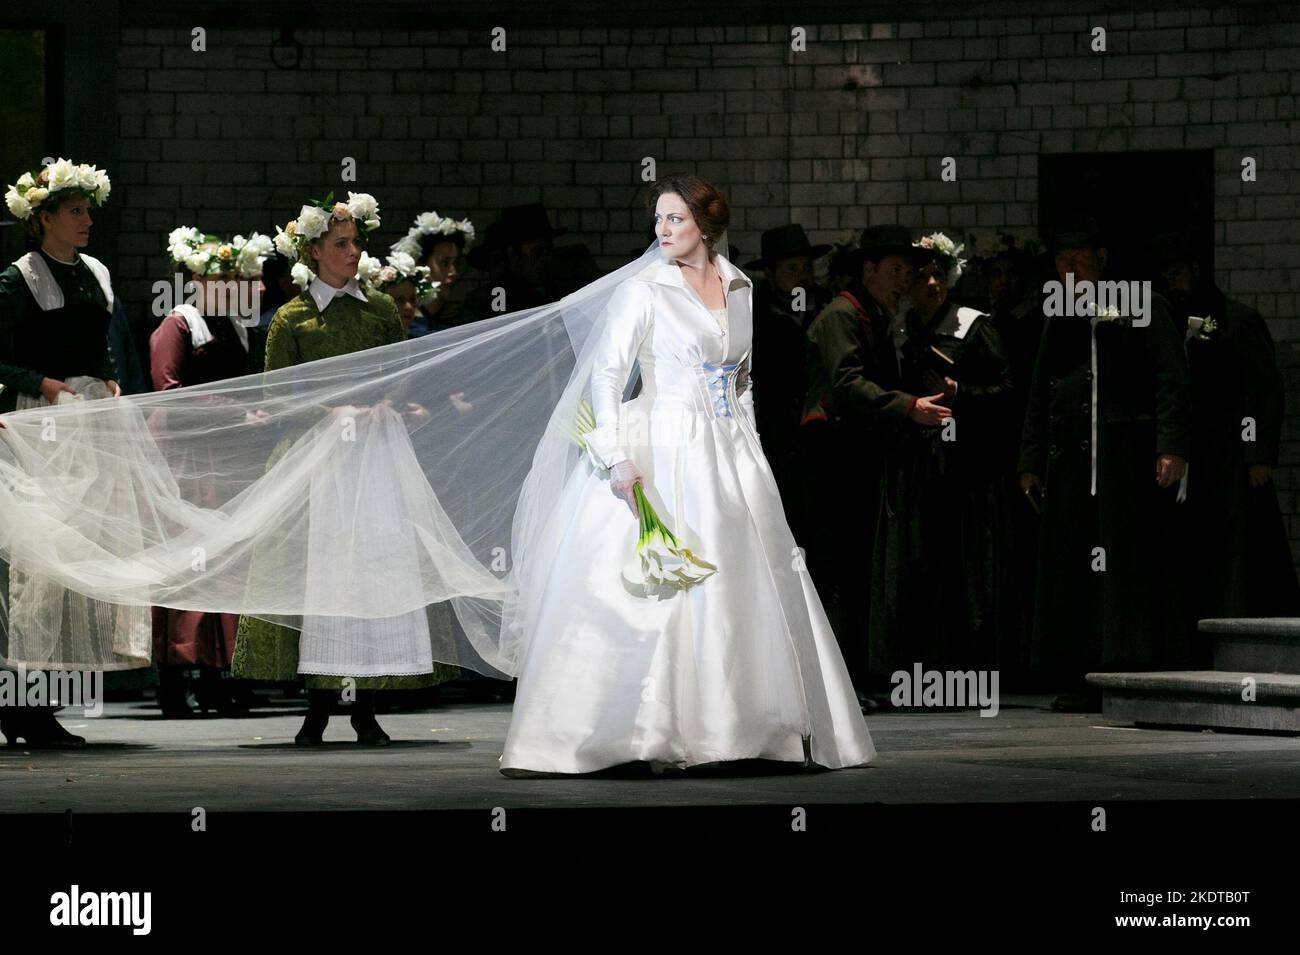 Emma Bell (Elsa von Brabant) in LOHENGRIN by Wagner at Welsh National Opera (WNO), Wales Millennium Centre, Cardiff, Wales  22/05/2013  conductor Lothar Koenigs  director & designer: Antony McDonald  lighting: Lucy Carter Stock Photo